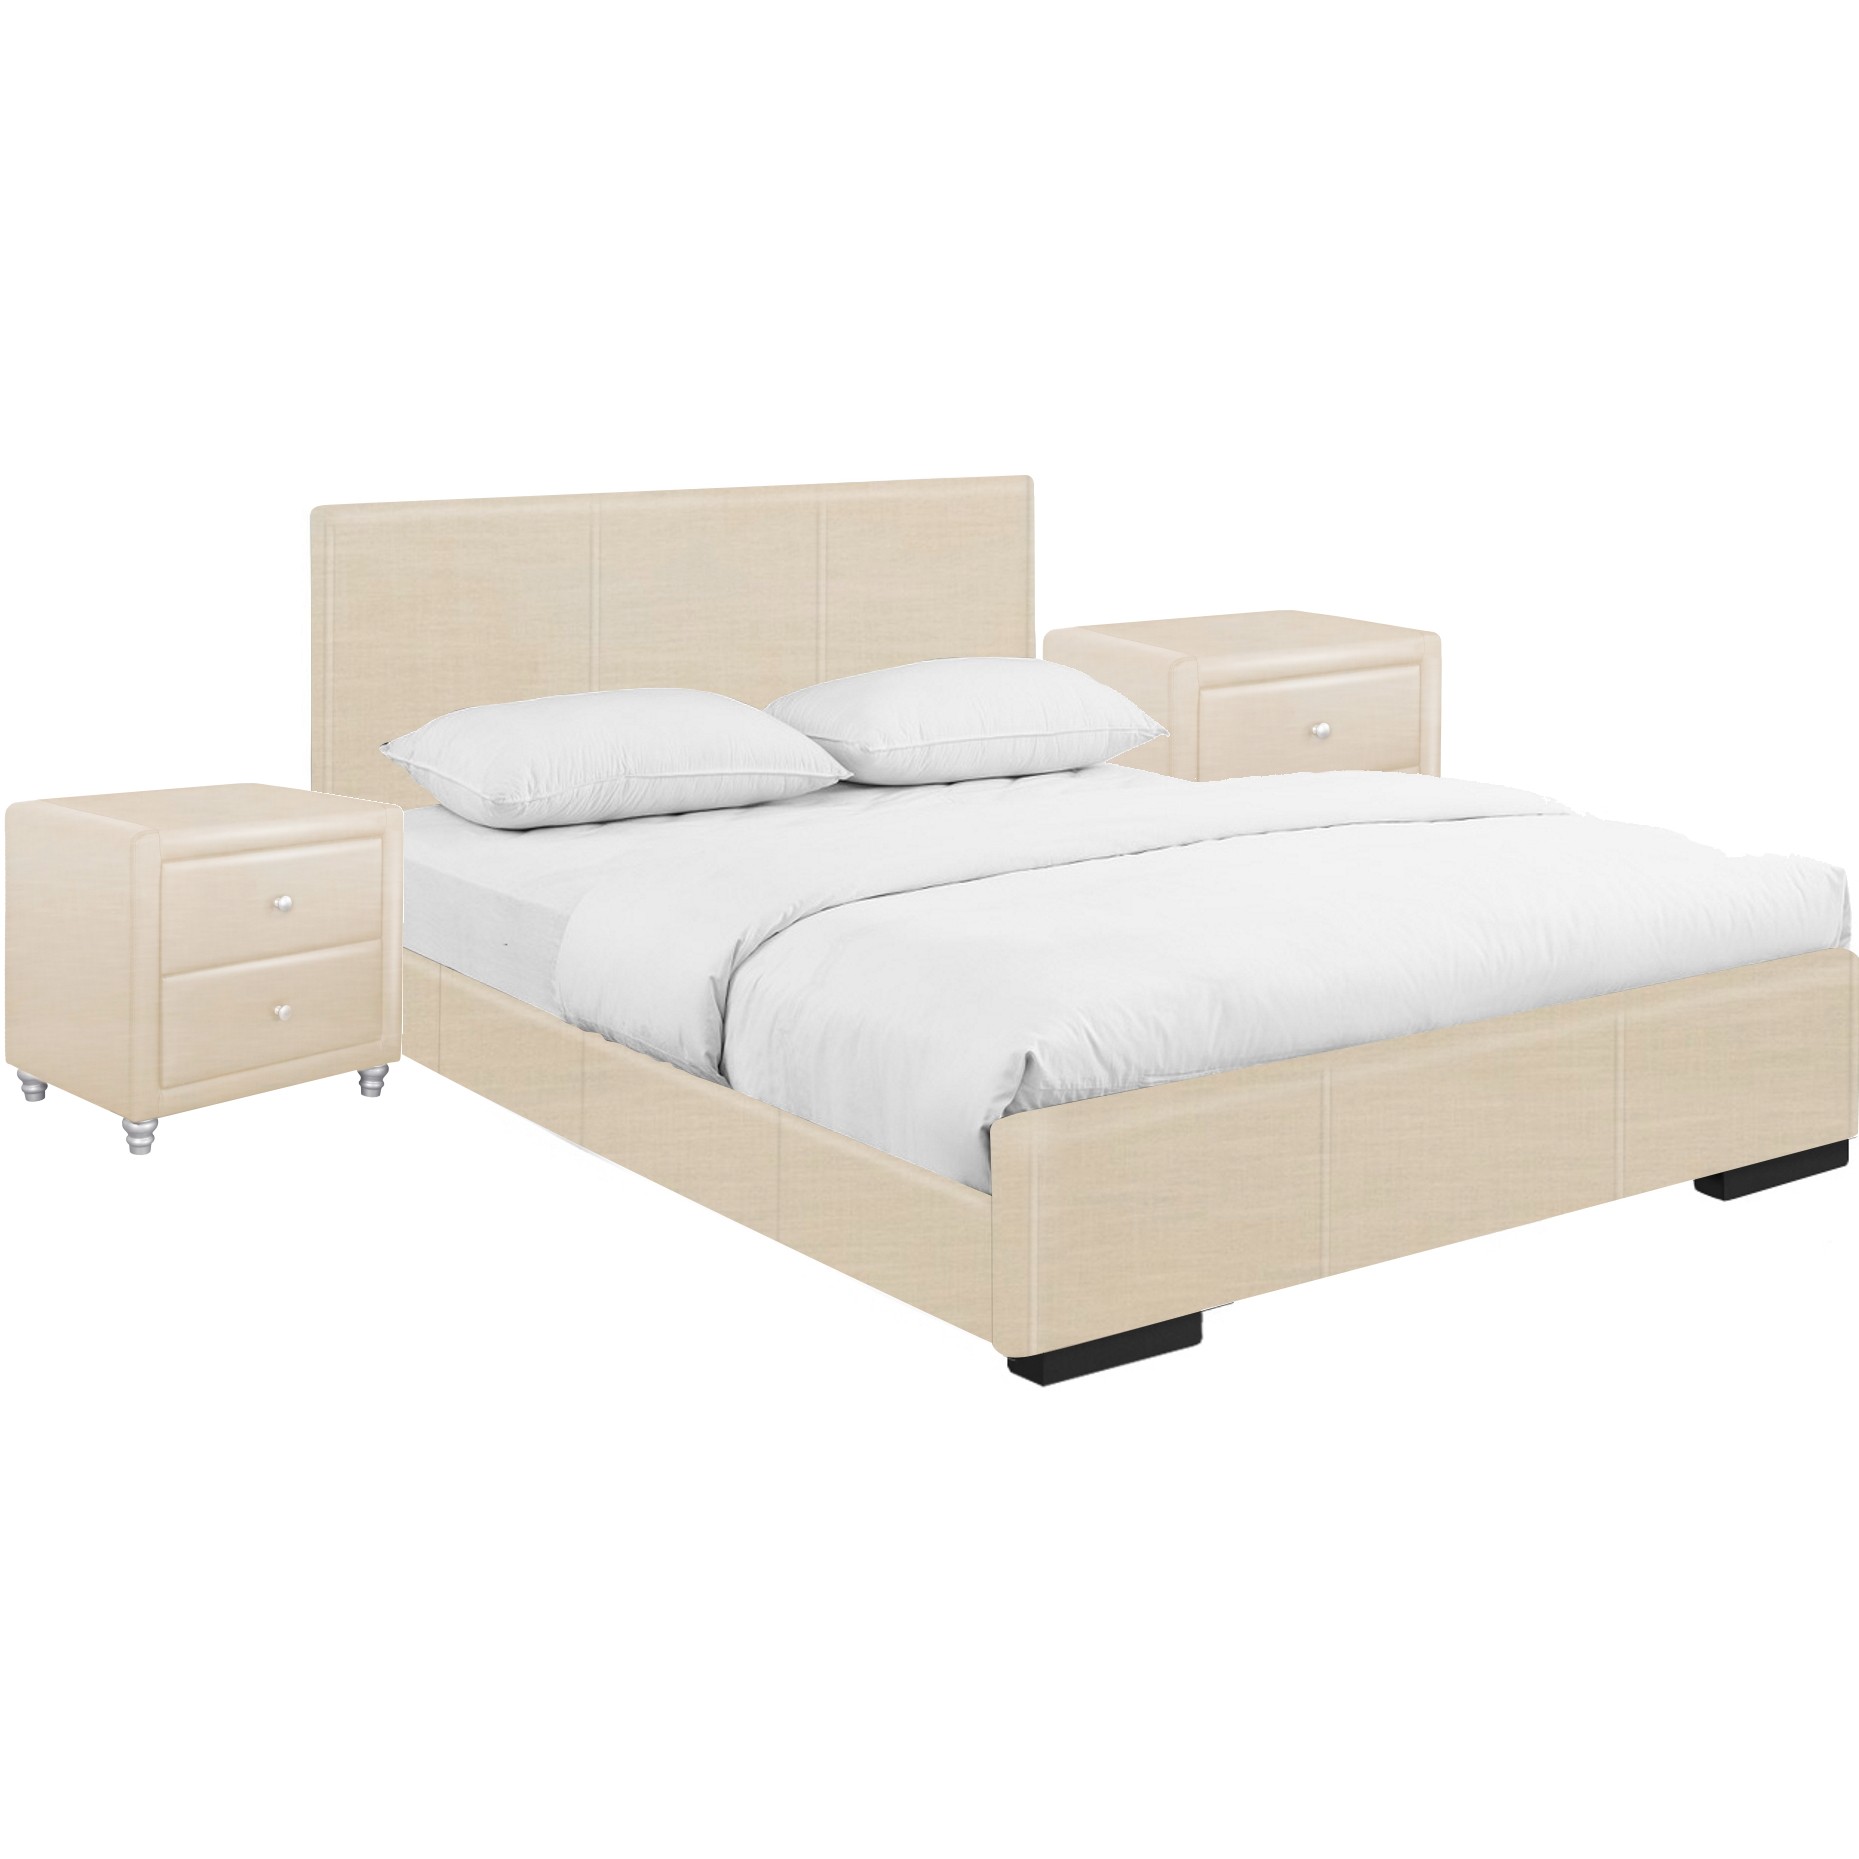 Beige Upholstered Platform King Bed with Two Nightstands-397068-1